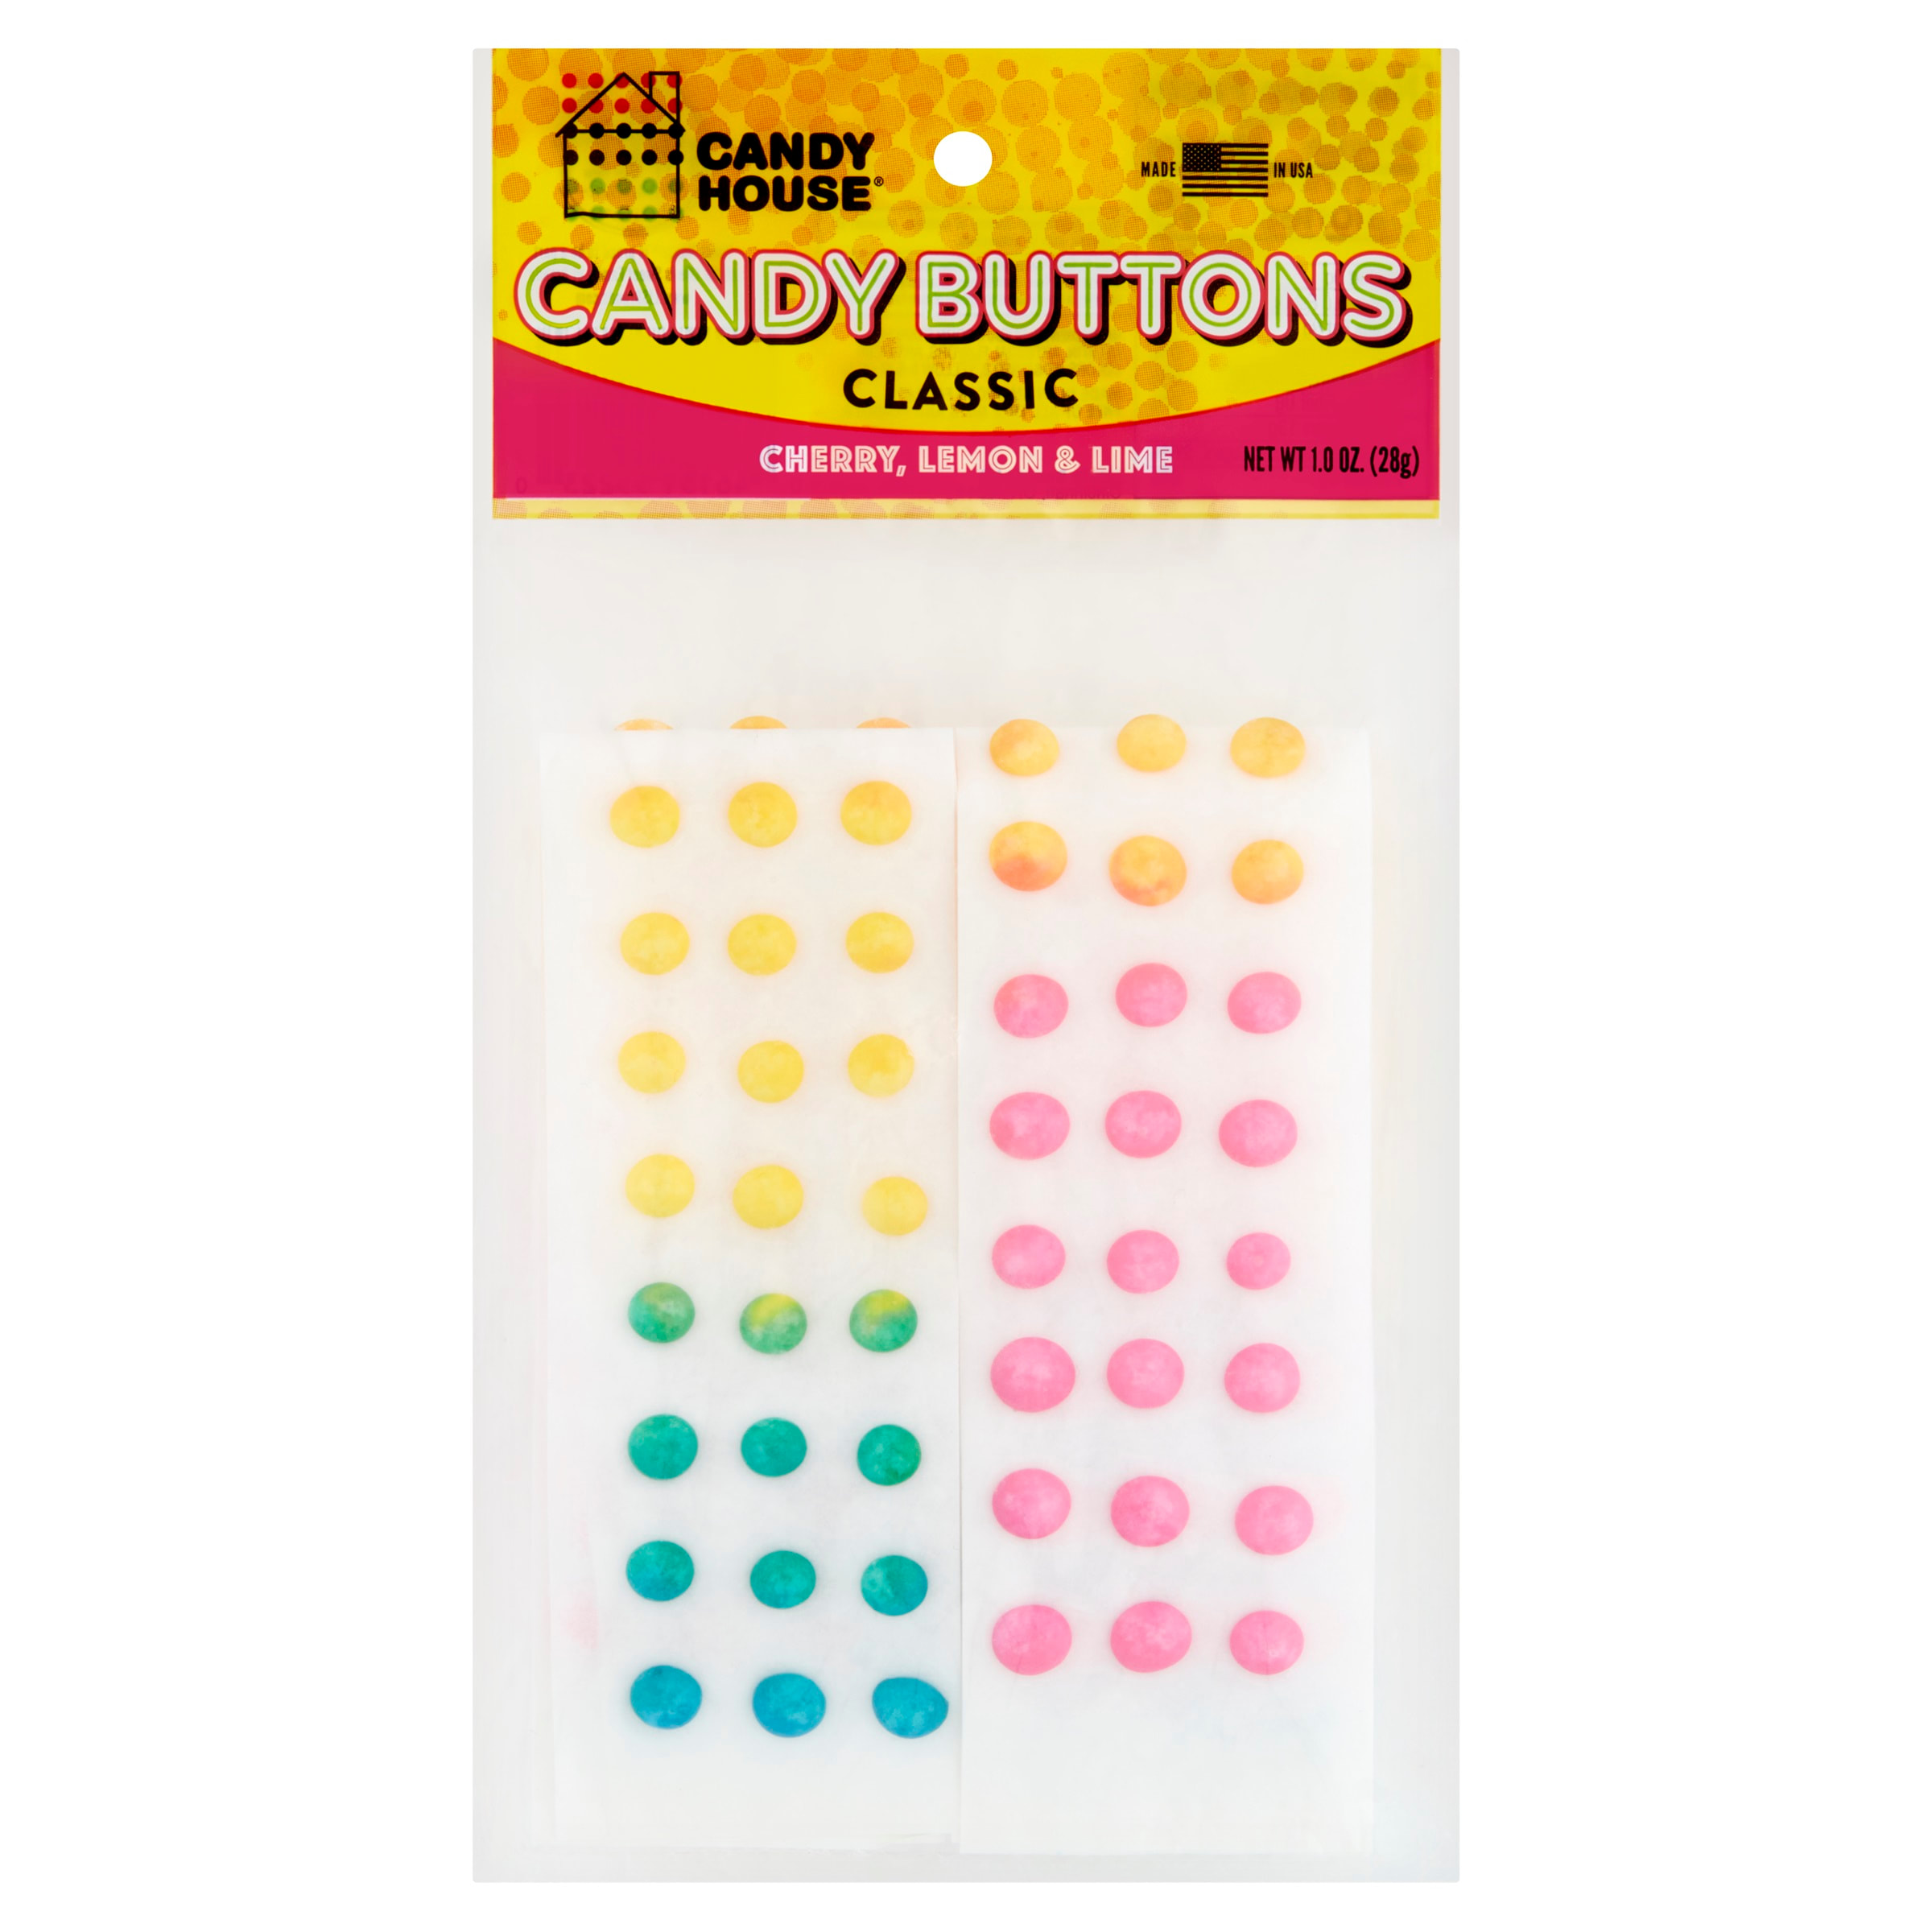 Candy House Classic Candy Buttons, 1-oz.